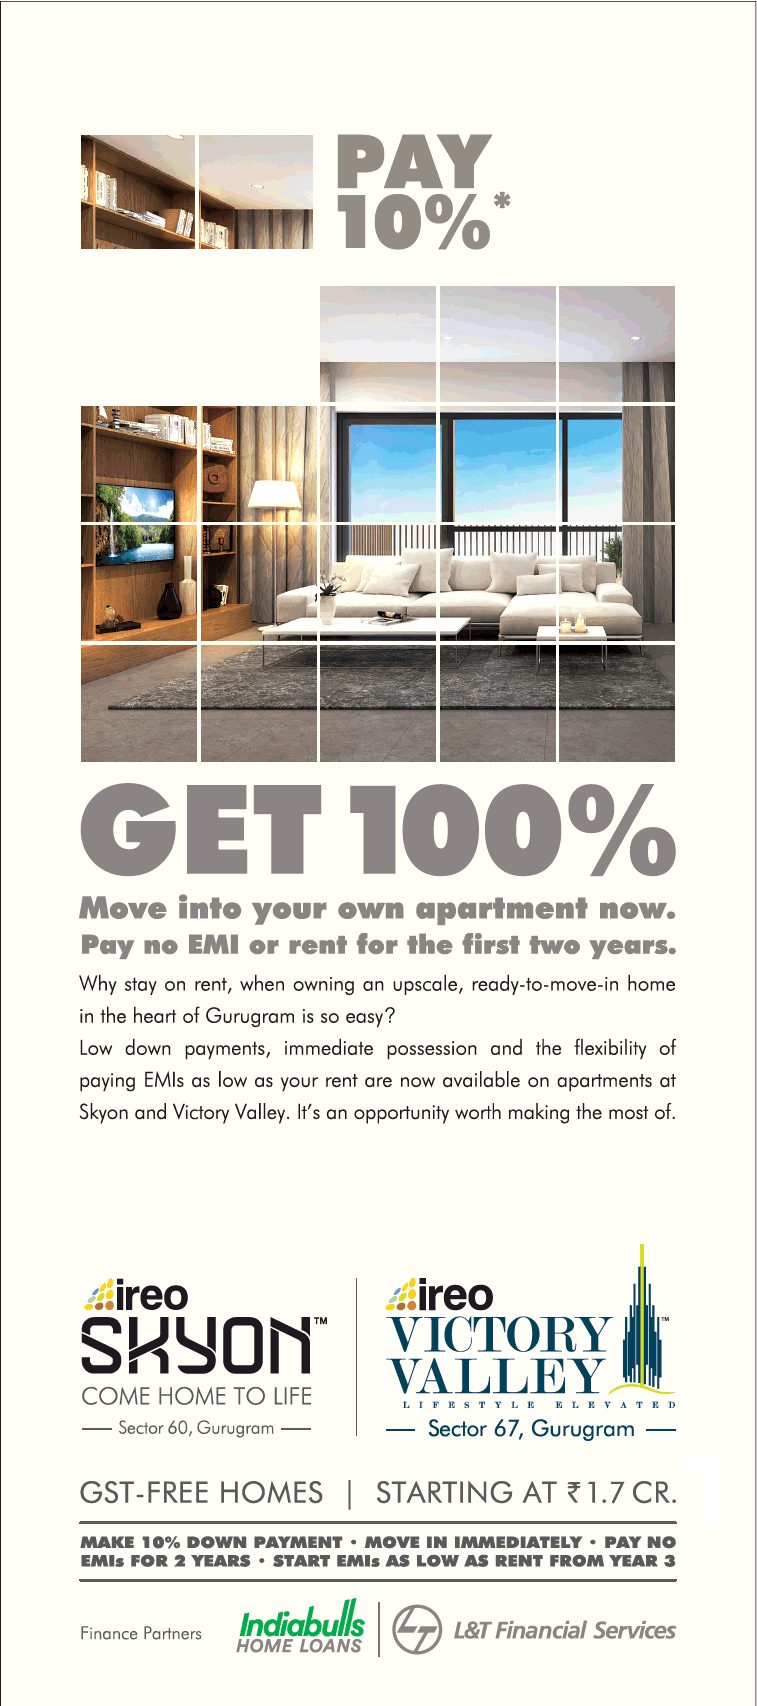 Pay 10%, Get 100% with No Rent No EMI at Ireo Victory Valley & Ireo Skyon, Gurgaon